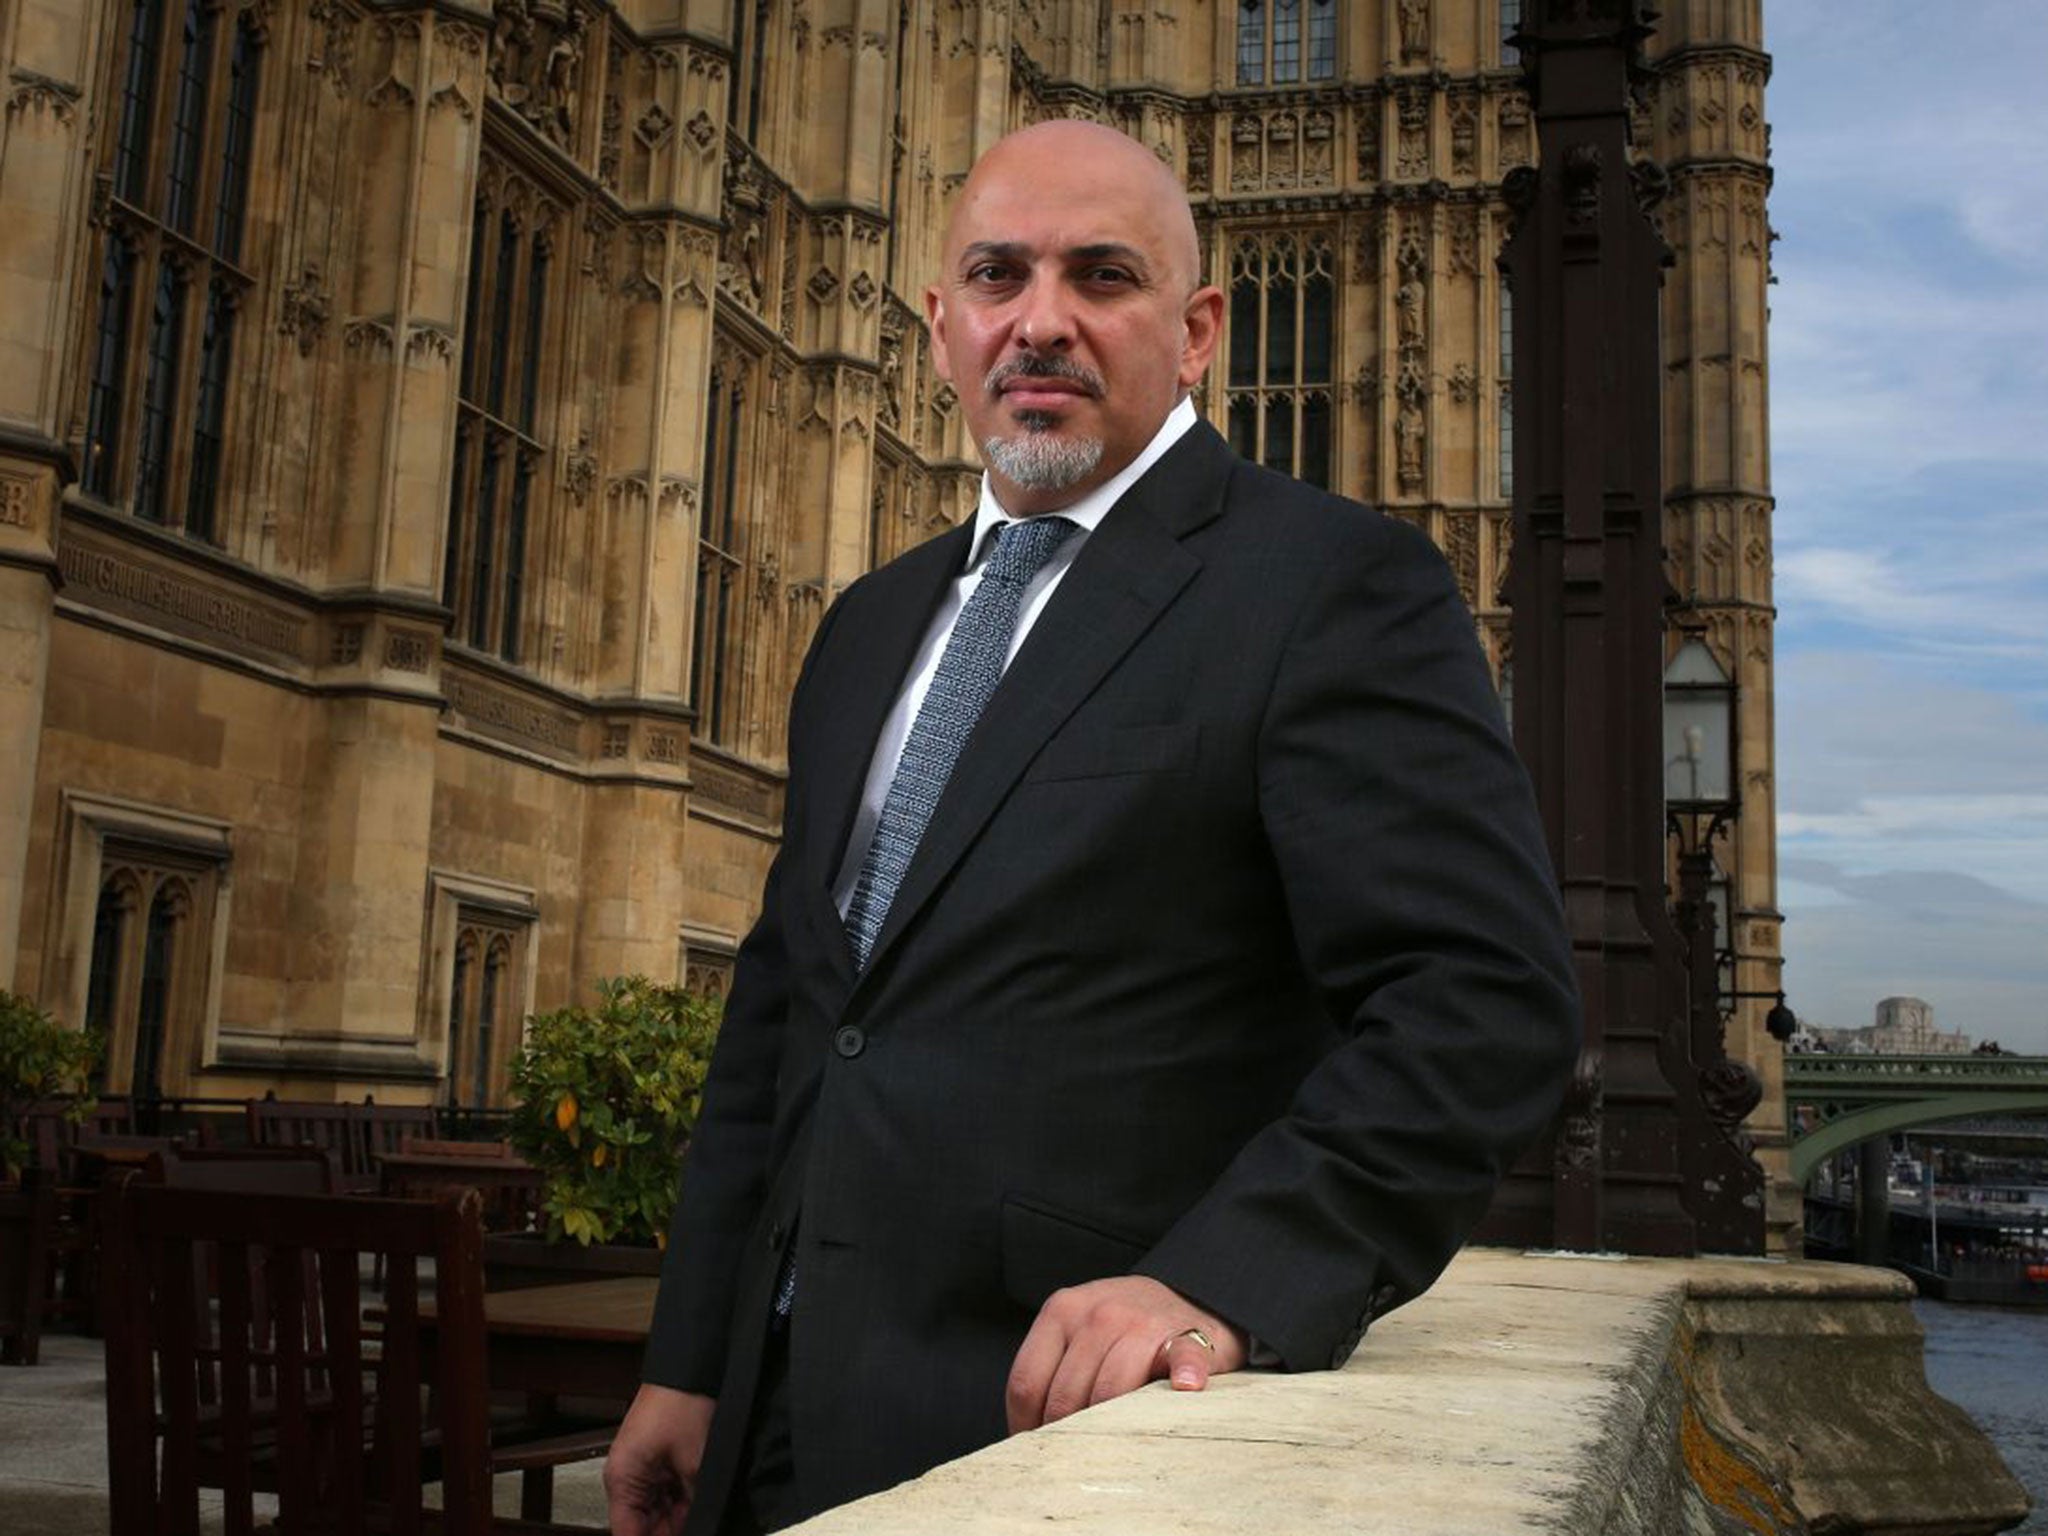 Nadhim Zahawi, like other pro-Brexit politicians, has argued it is possible to have access to the common market without accepting EU conditions, such as free movement of people